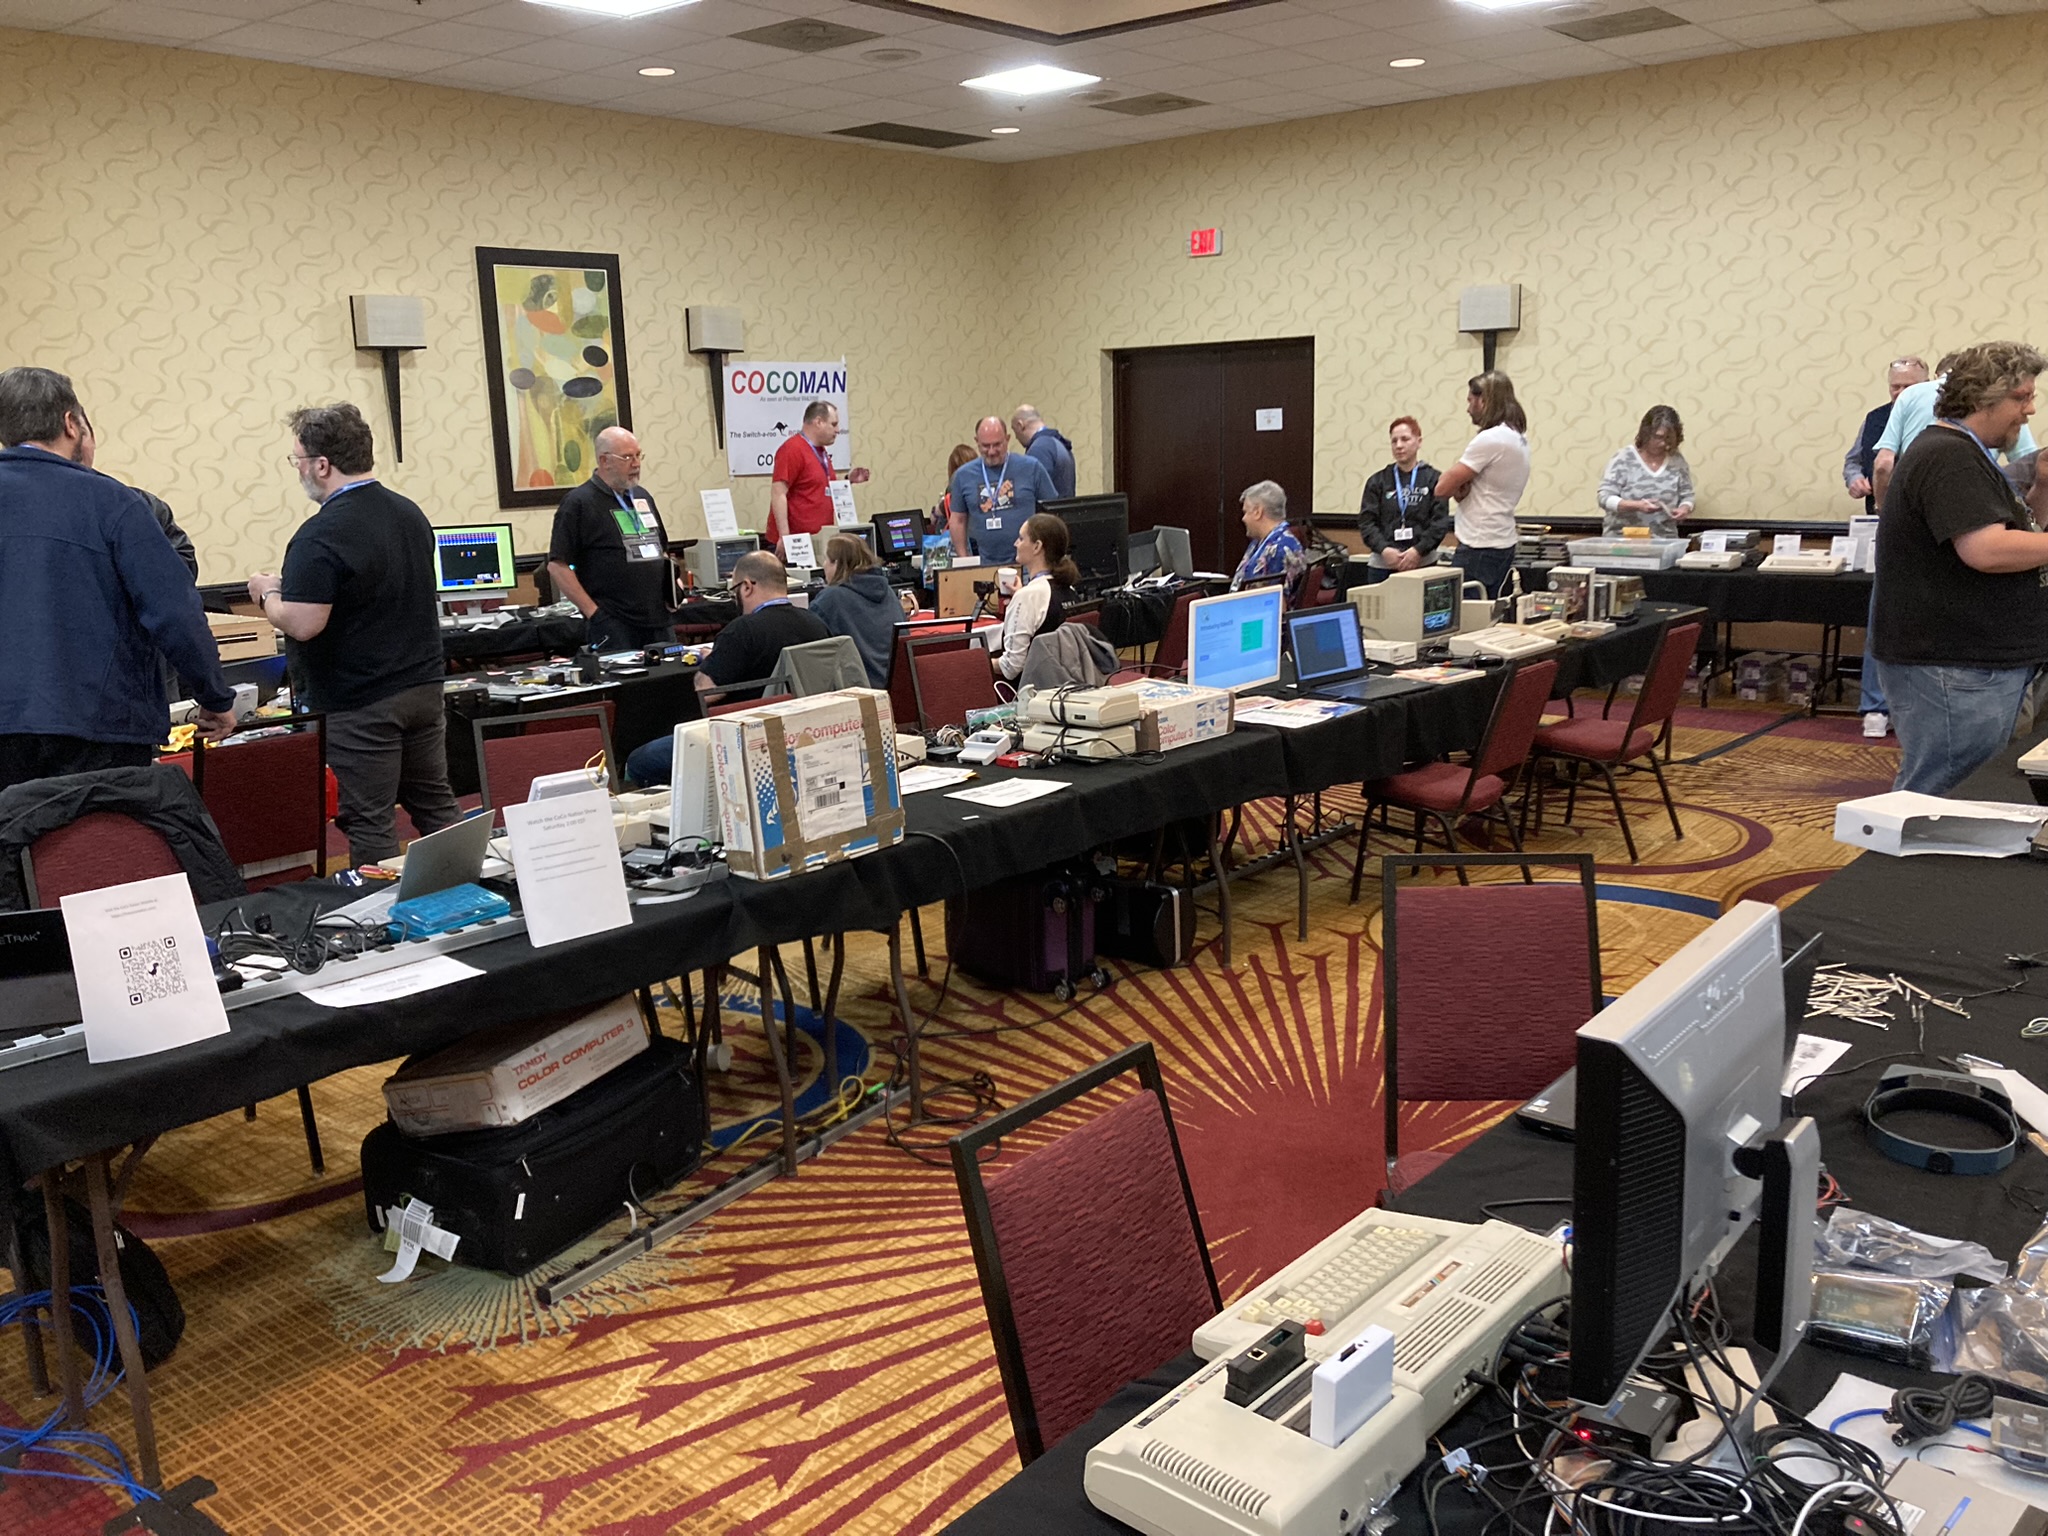 Celebrating Retro Computing at CoCoFEST! with PlayPi Games